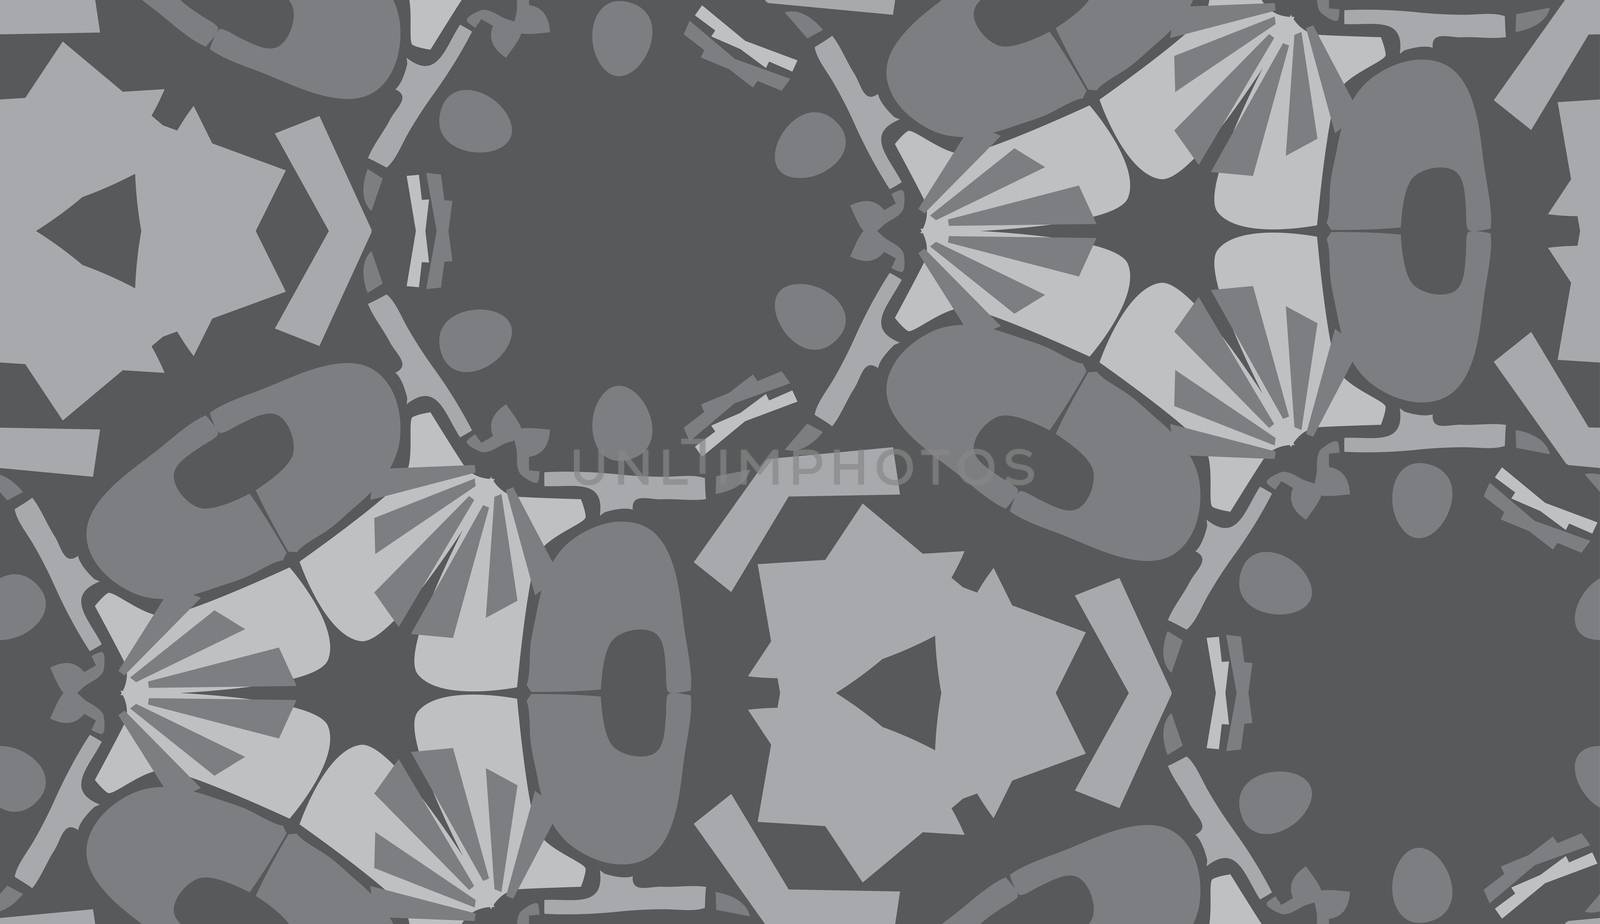 Repeating gray abstract shapes in repeating background pattern